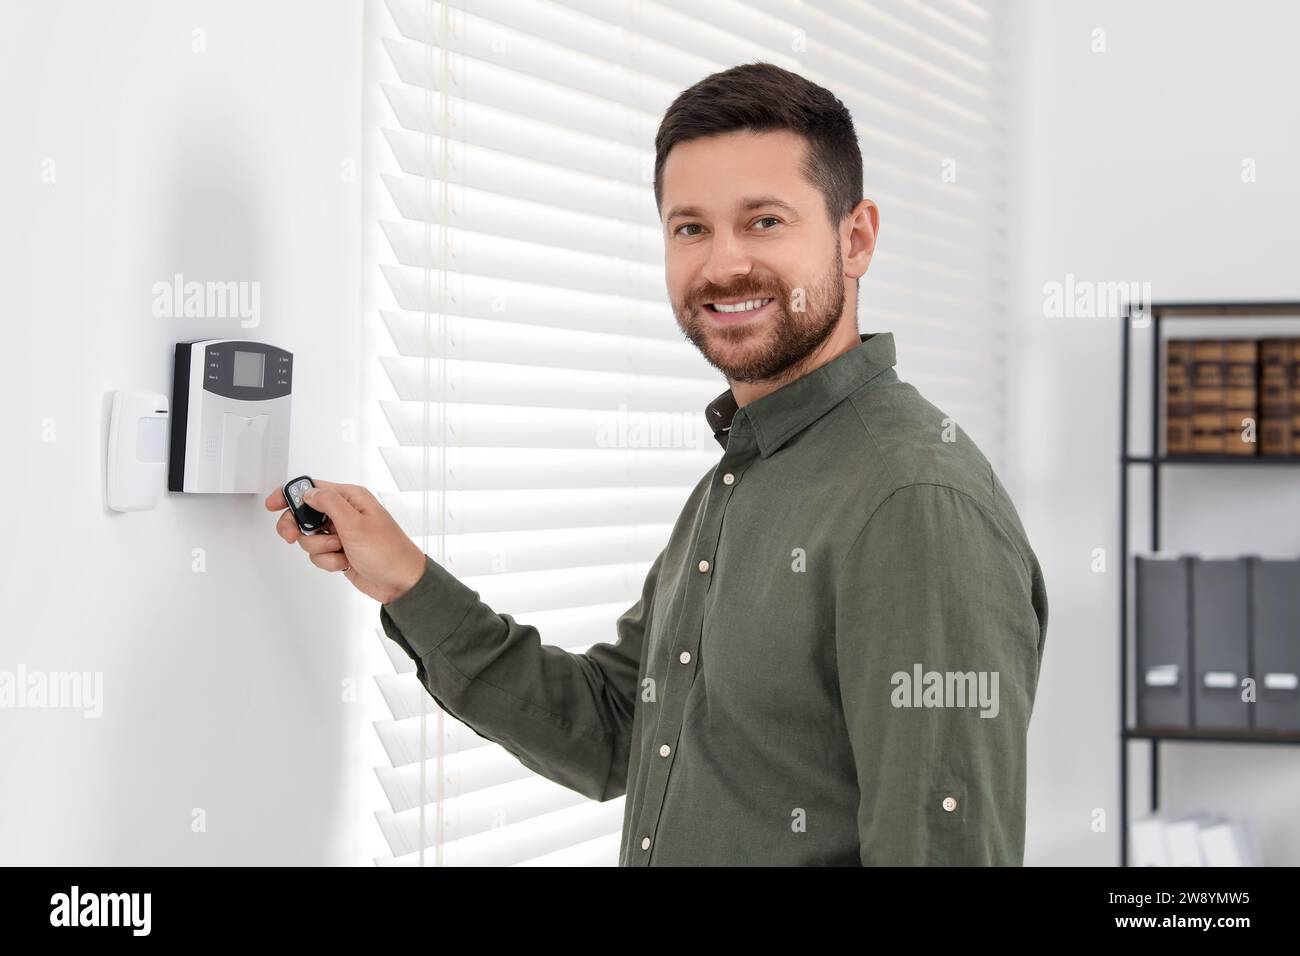 Home security system. Man using alarm key fob indoors Stock Photo